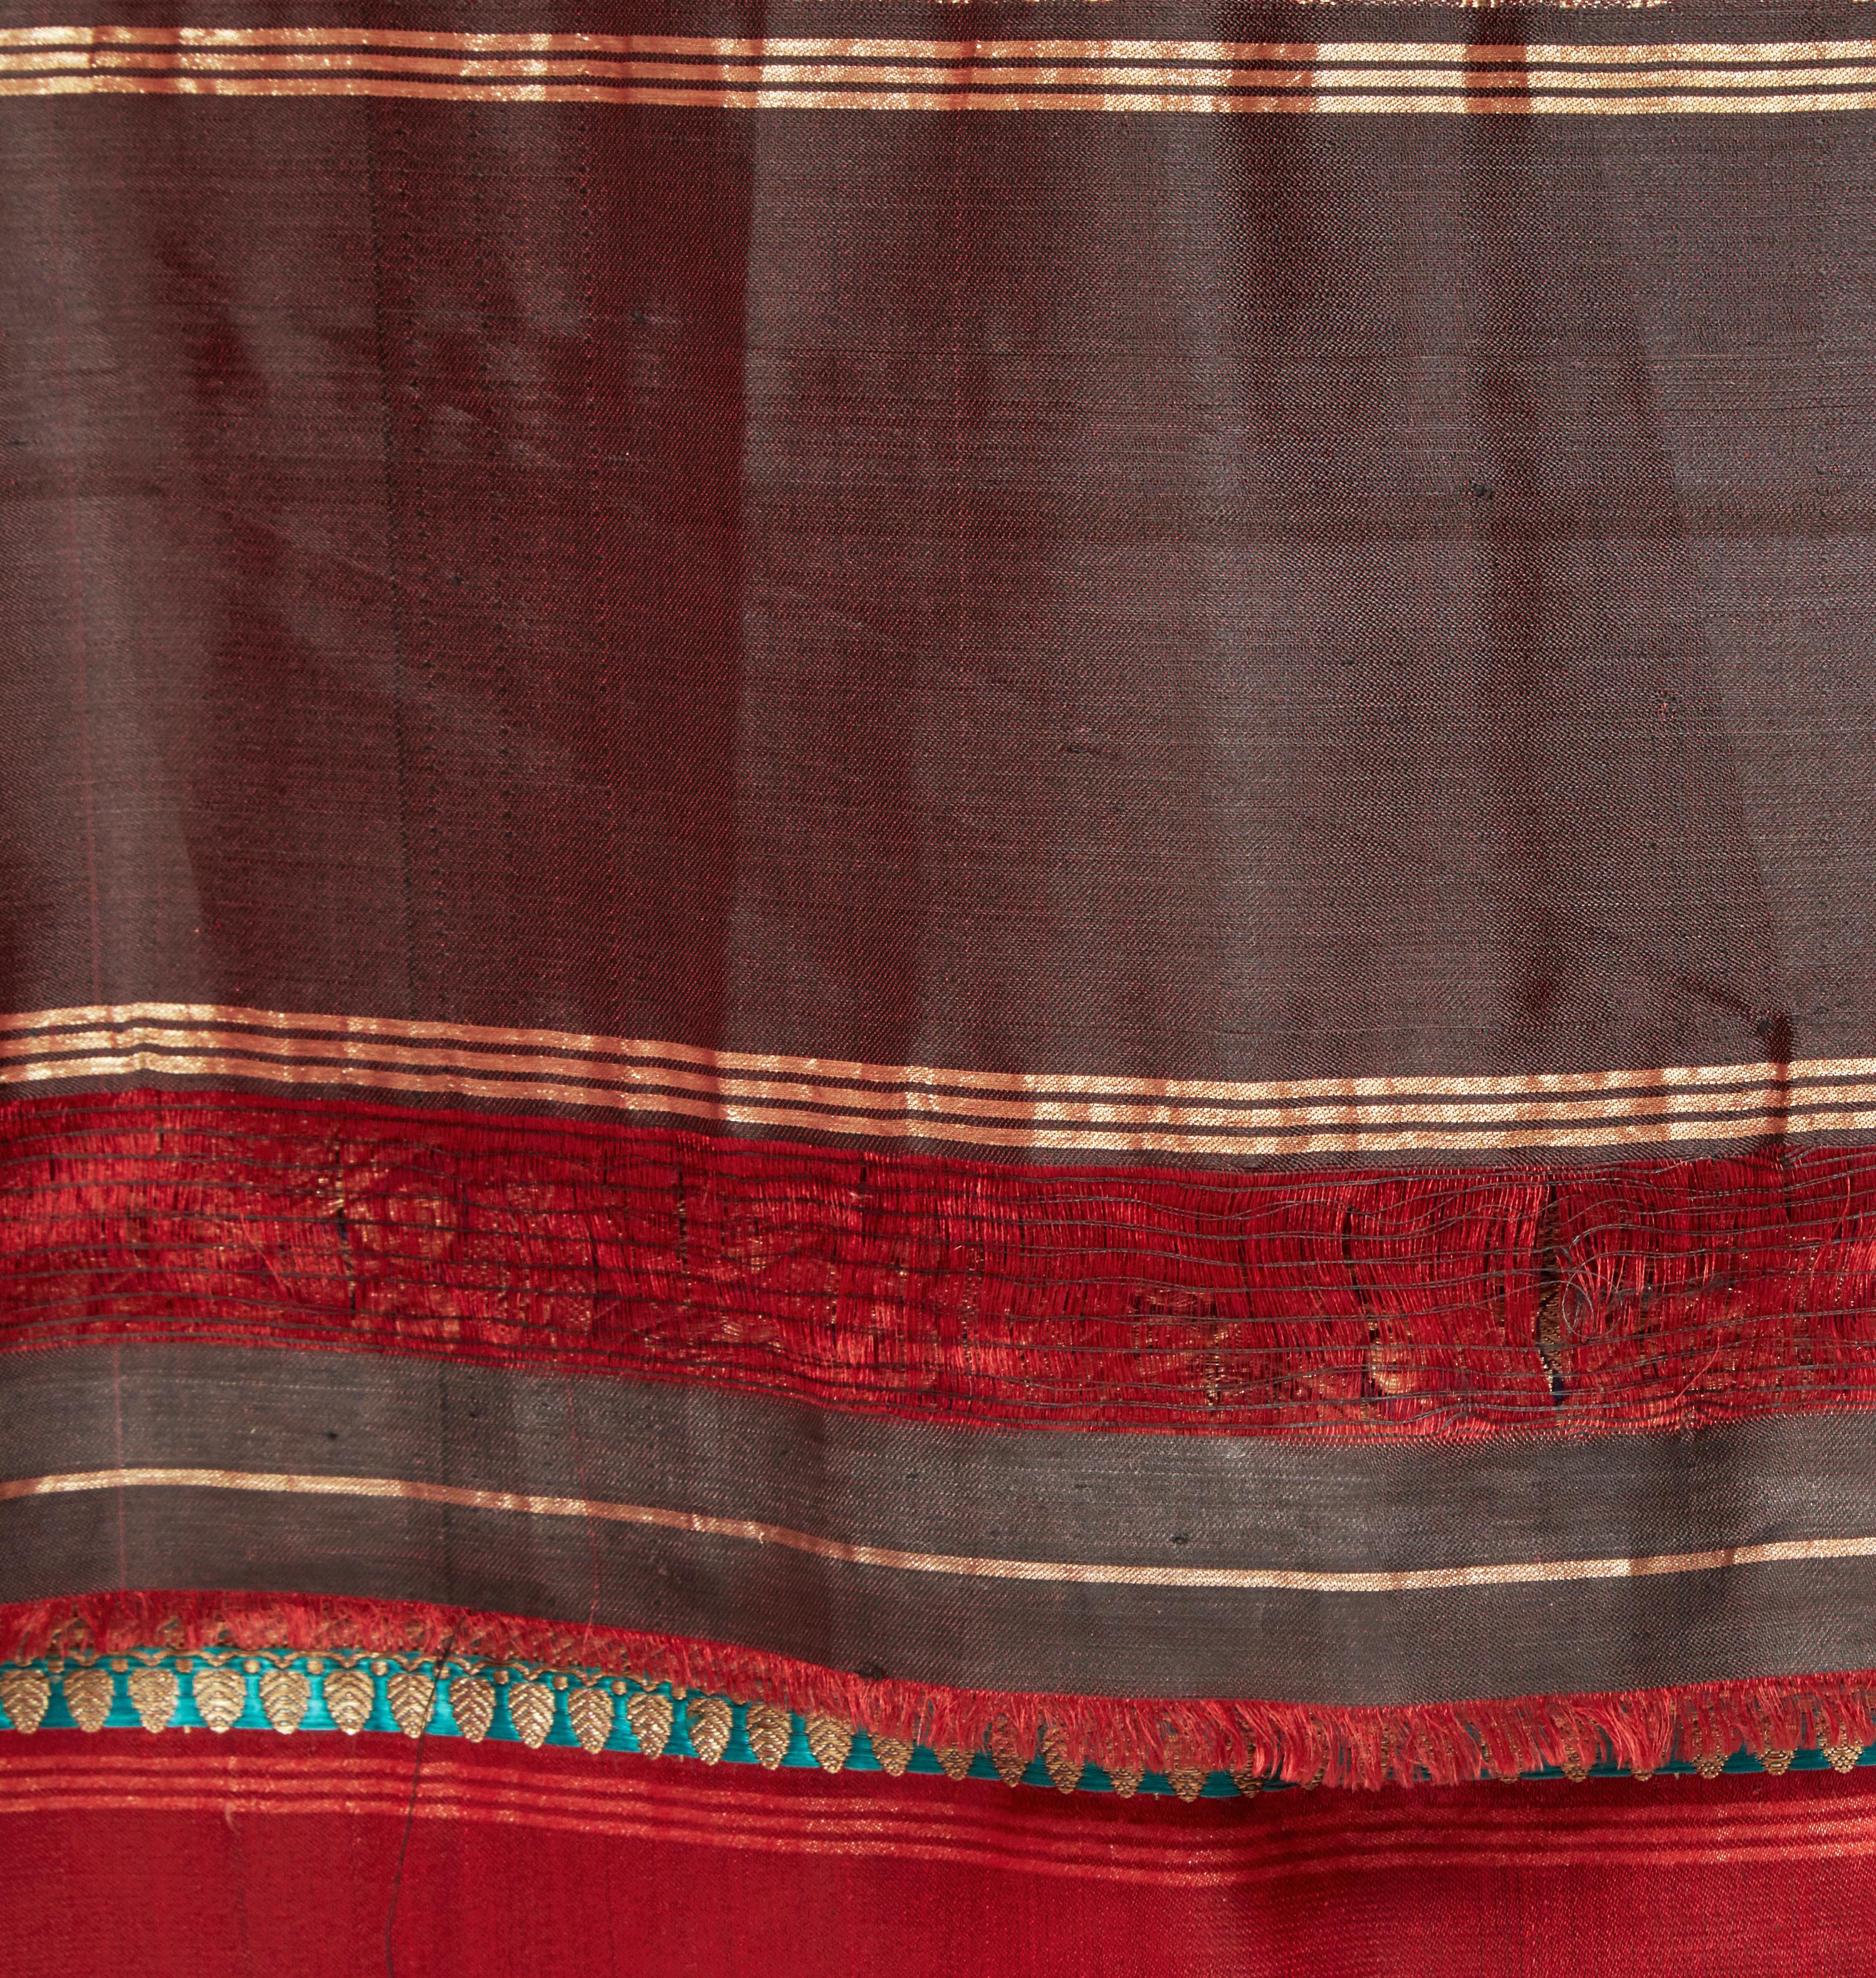 Embroidered Silk Brocade Vintage Indian Sari, Mid 20th Century For Sale